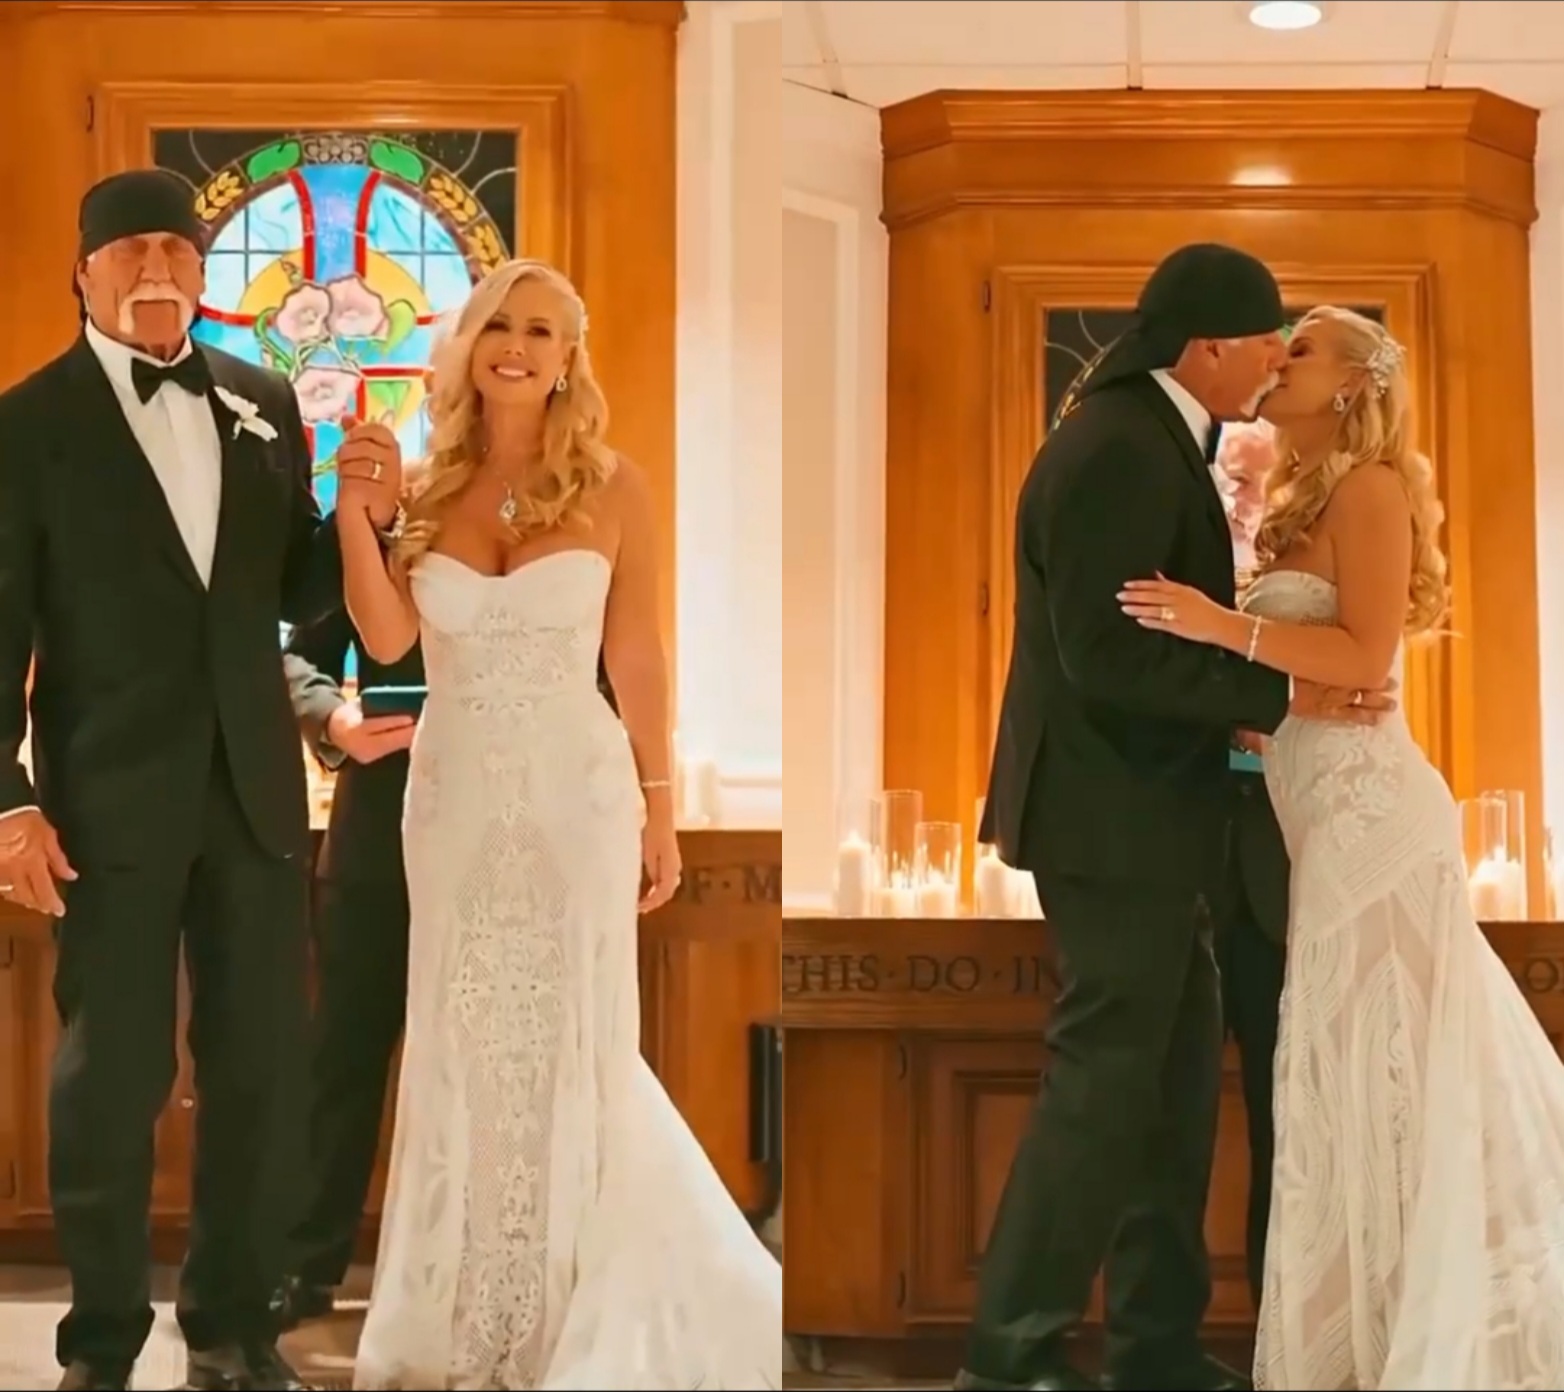 MY NEW LIFE STARTS NOW” HULK HOGAN WRITES AS HE SHARES VIDEO FROM HIS THIRD WEDDING